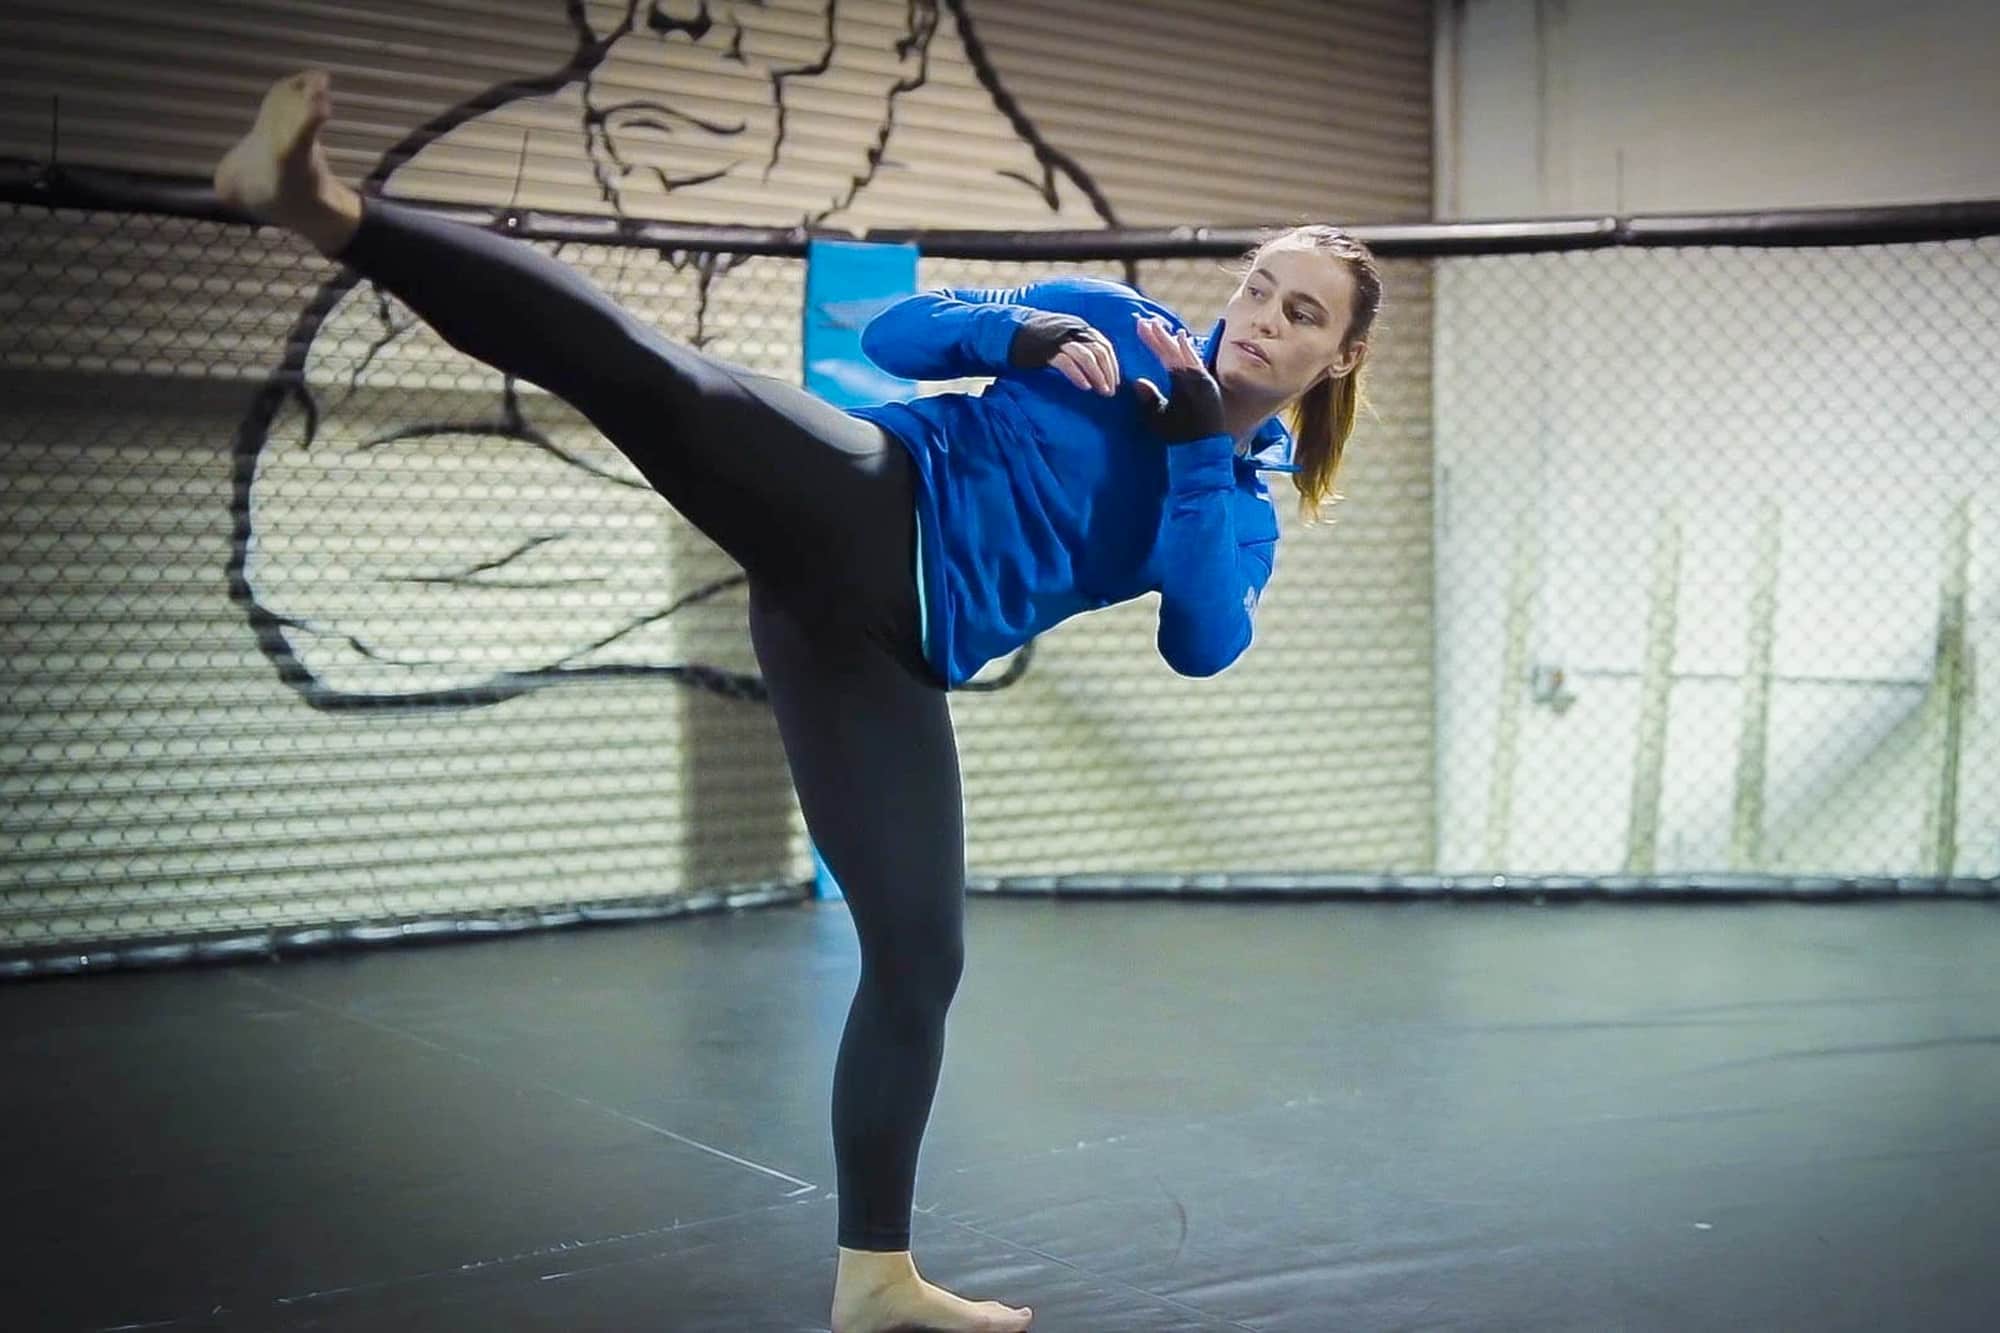 IMMAF standout Dee Begley aims for first pro victory